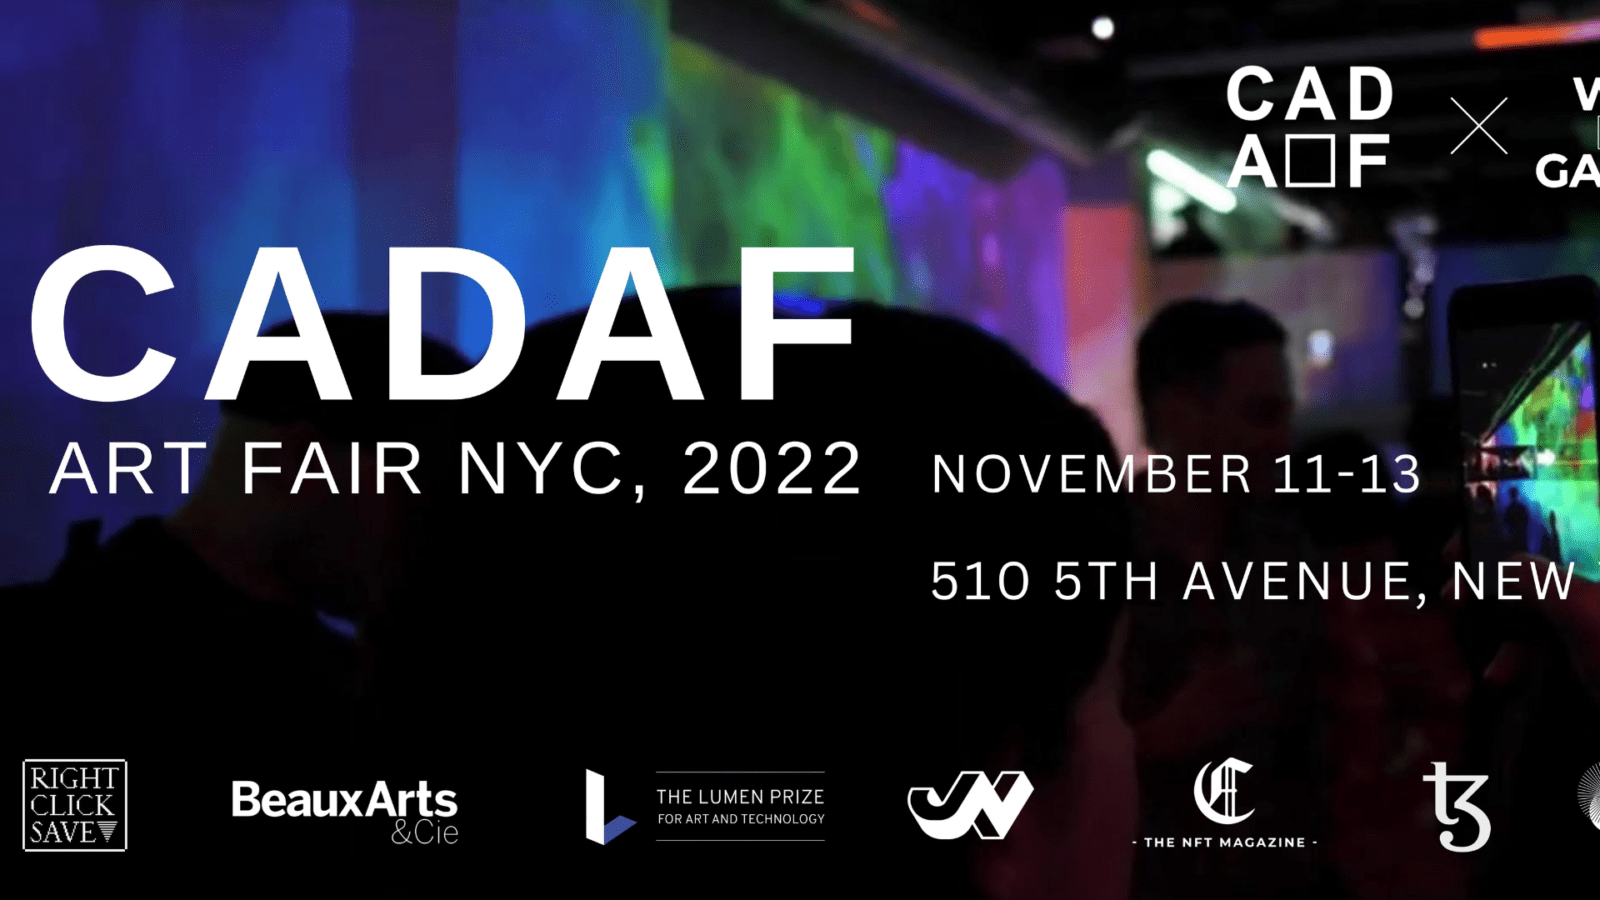 The new edition of CADAF ART FAIR is coming to New York